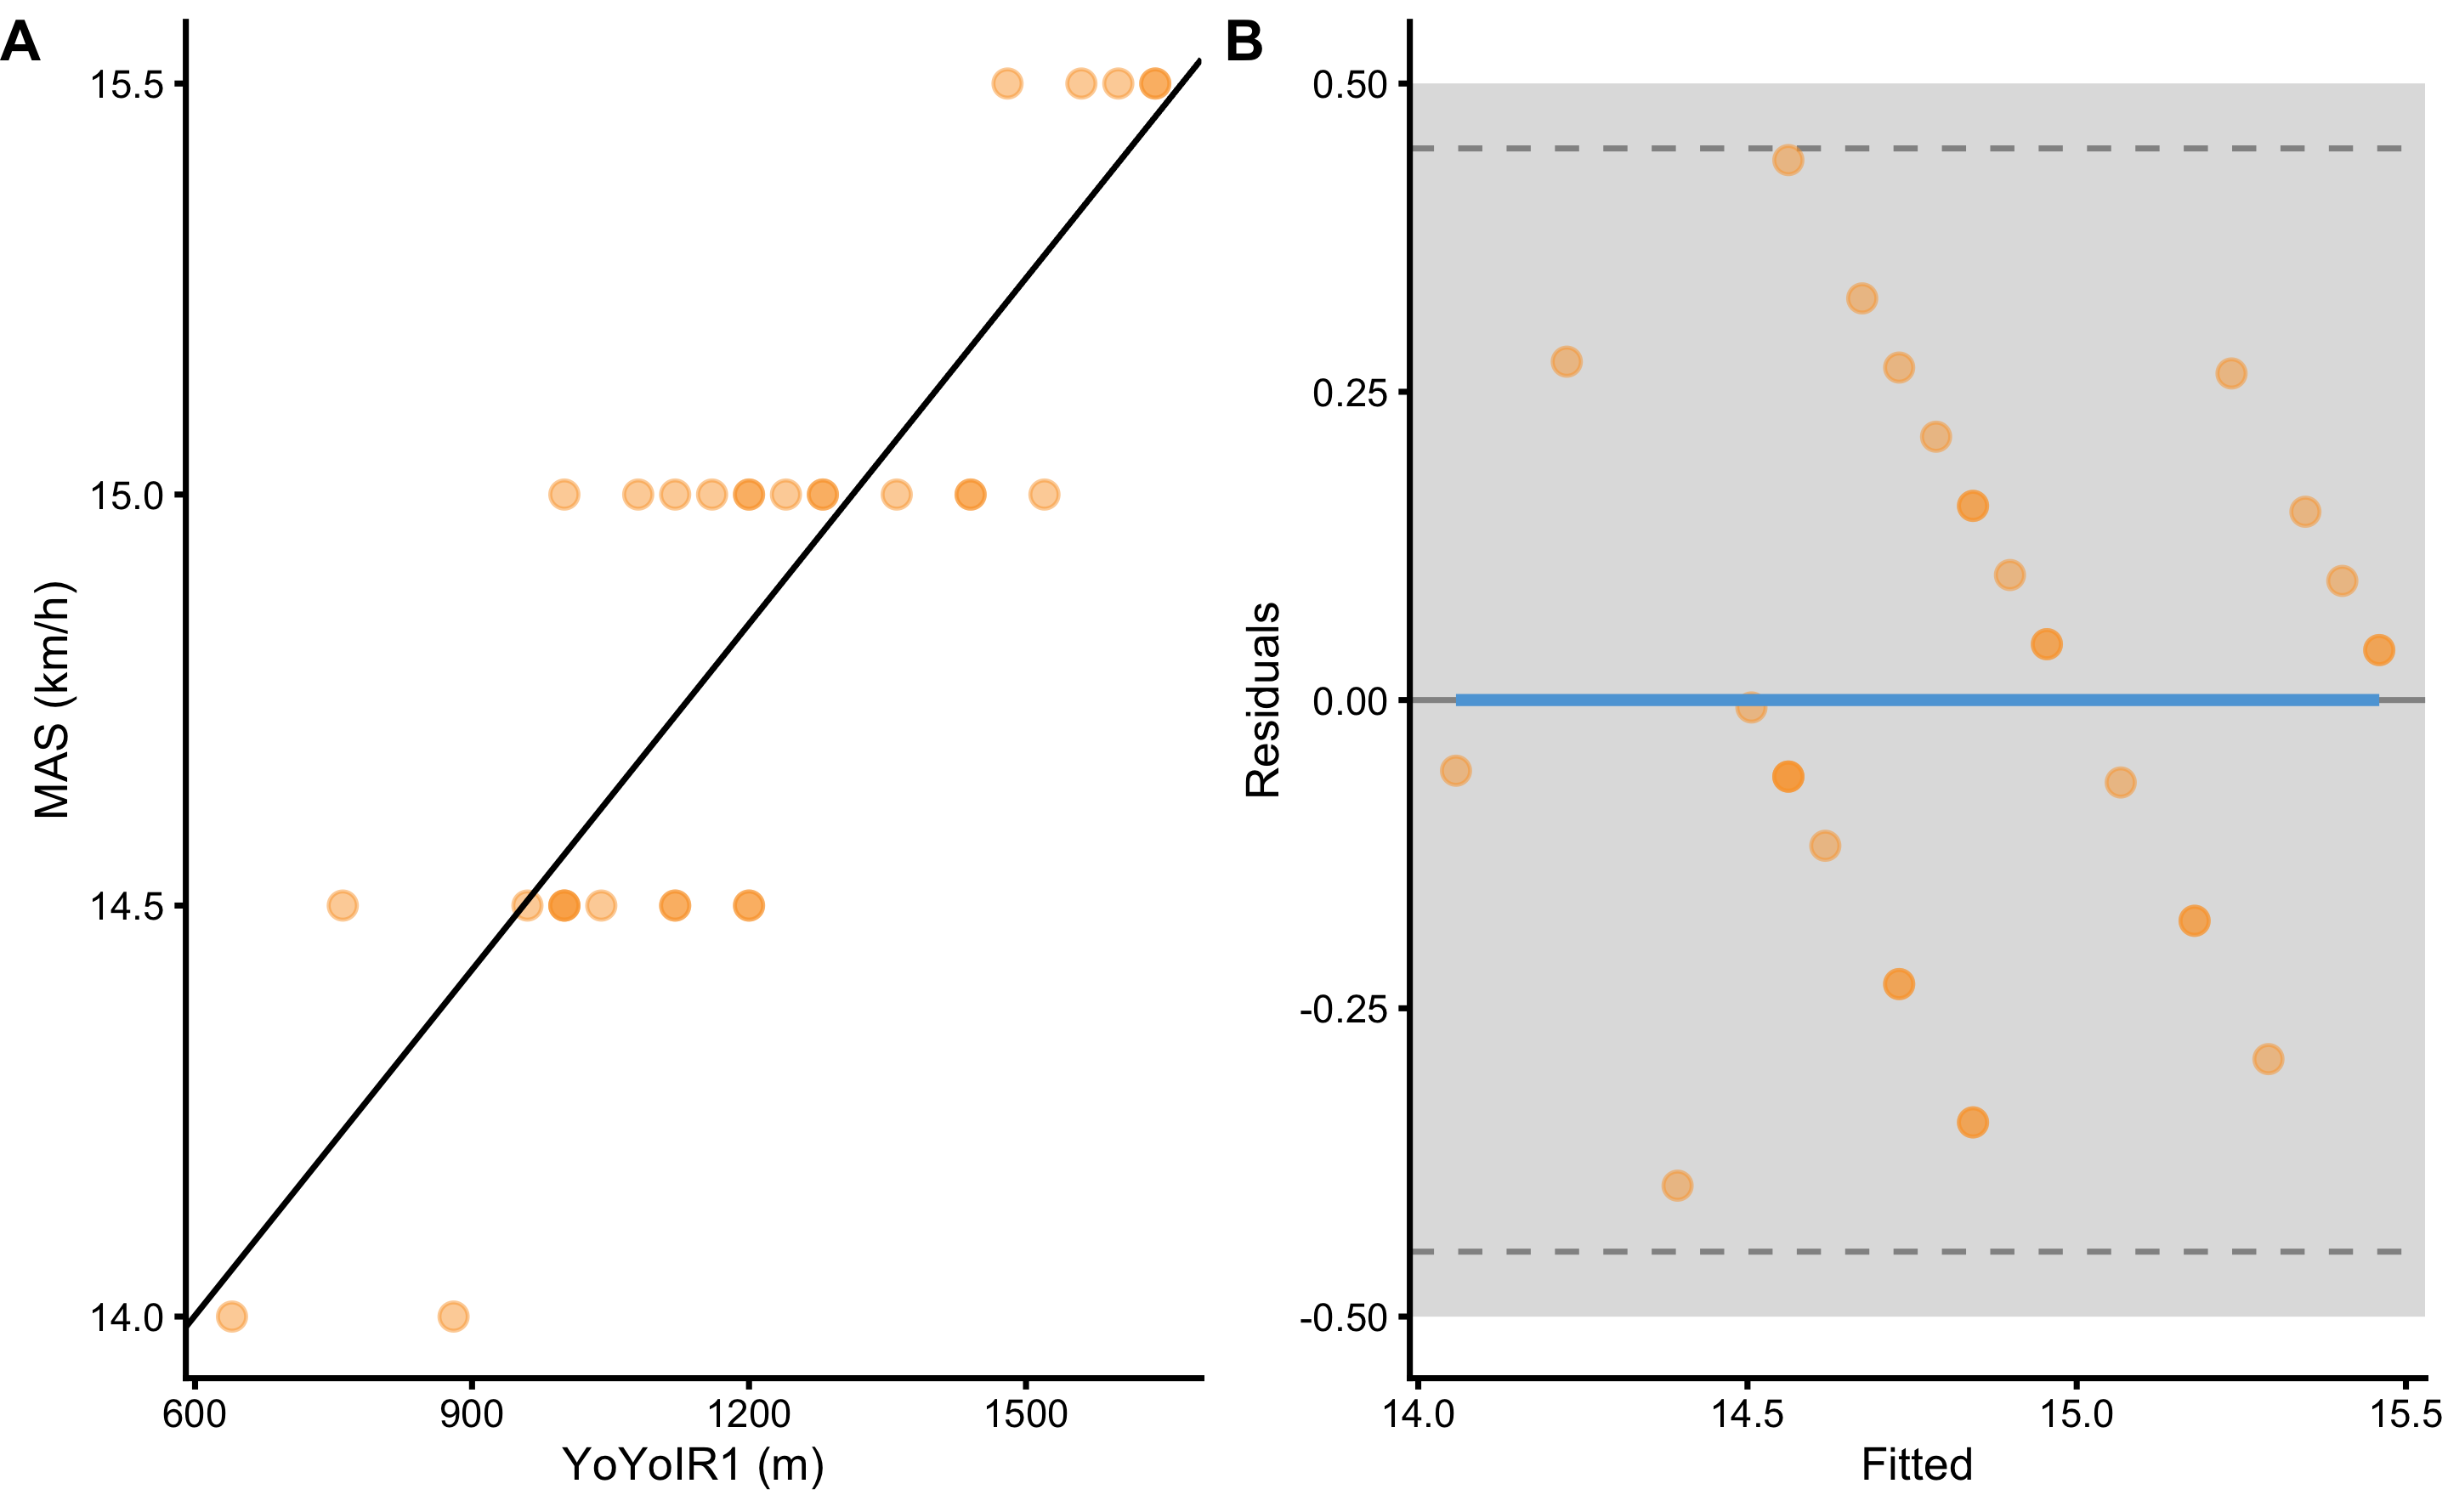 Scatter plot between two variables using SESOI to indicate practically significant difference A. Scatterplot with SESOI depicted as grey band around linear regression line. B. Residual plot, where the difference between MAS and linear regression line (model estimate) is plotted against linear regression line (fitted or predicted MAS). SESOI is represented with the grey band. Residuals within SESOI band are of no practical difference. Dashed lines represent upper and lower levels of agreement using RSE and 95% confidence level (or in other words, 95% of the residuals distribution will be within these two dashed lines).